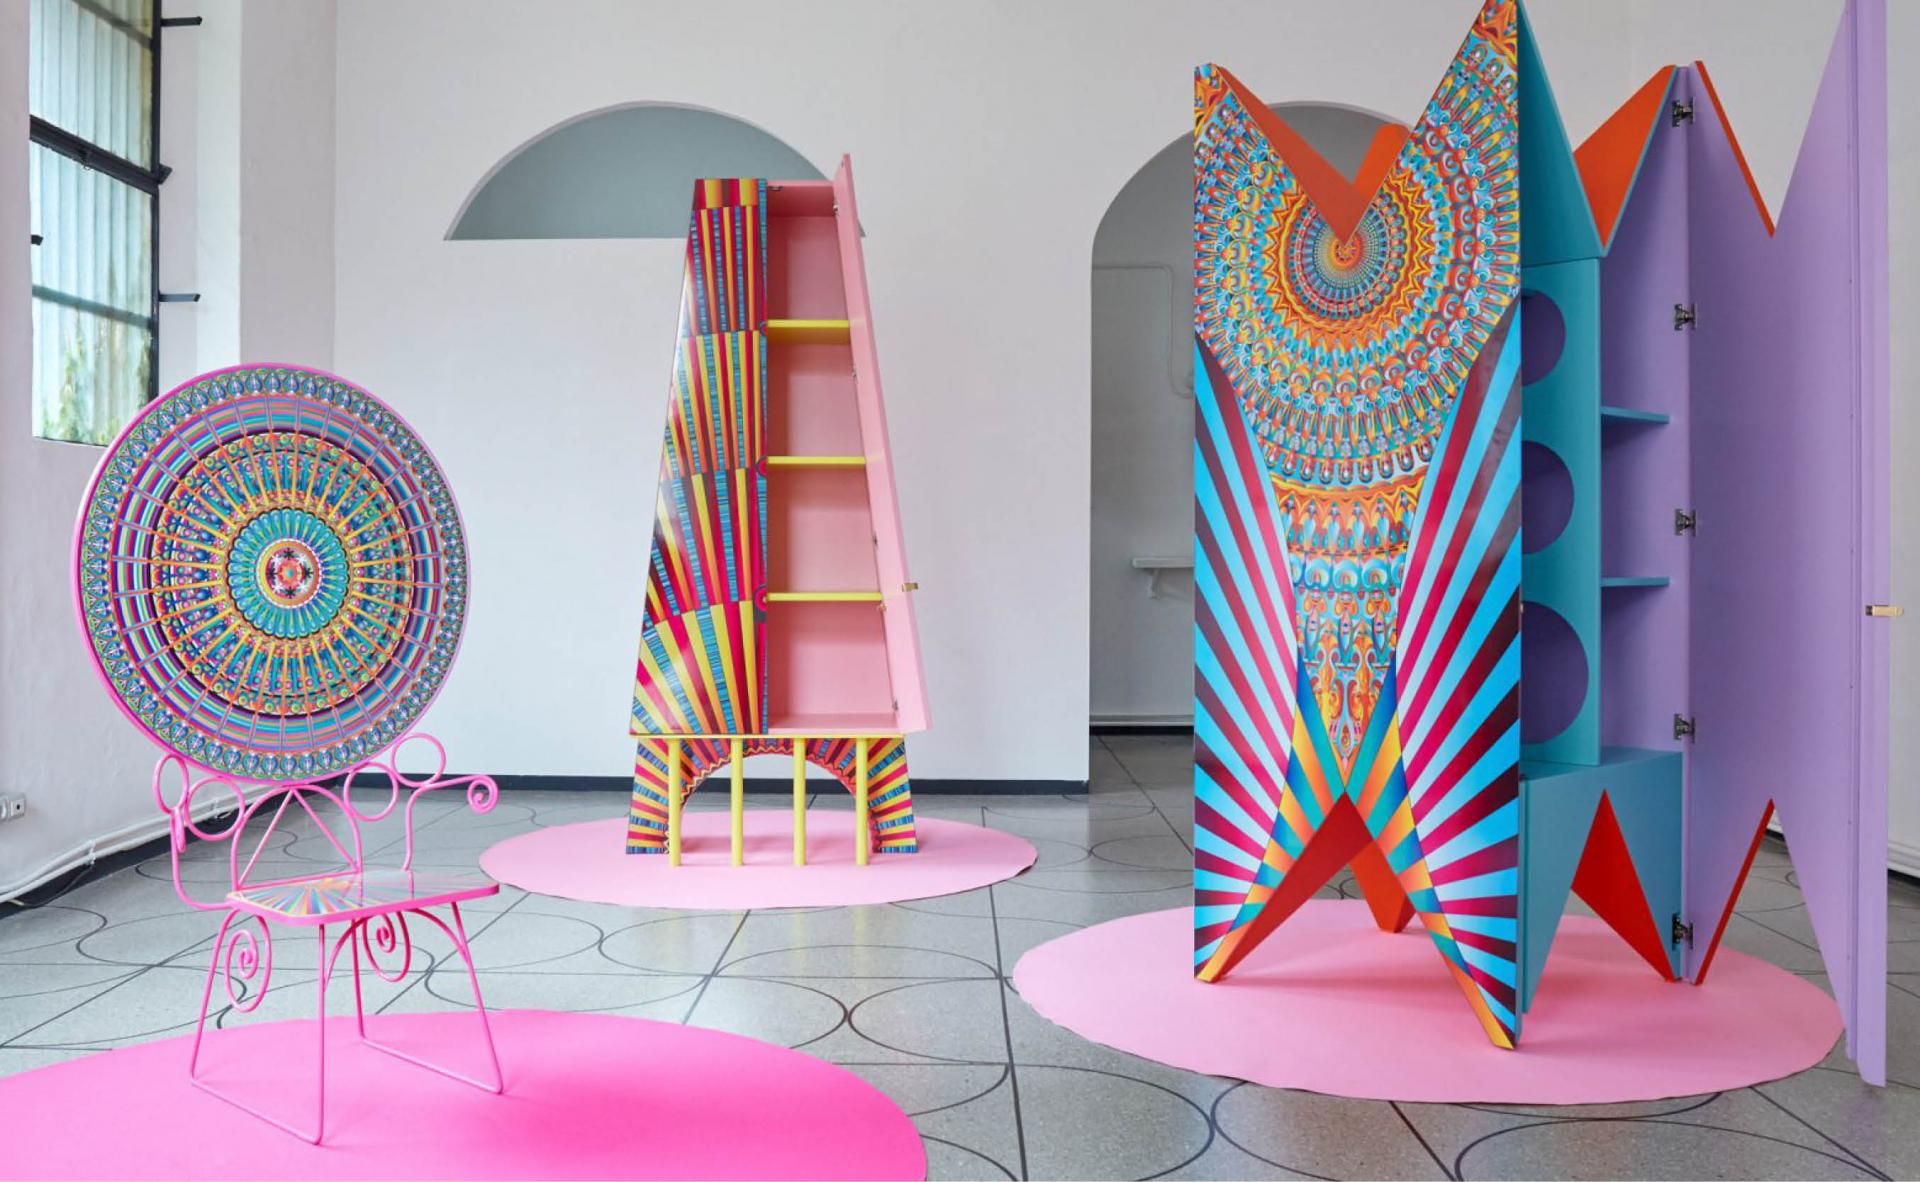 Move Over Minimalism and Make Way for the Chromatic Joy of Adam Nathaniel Furman’s ”New London Fabulous”